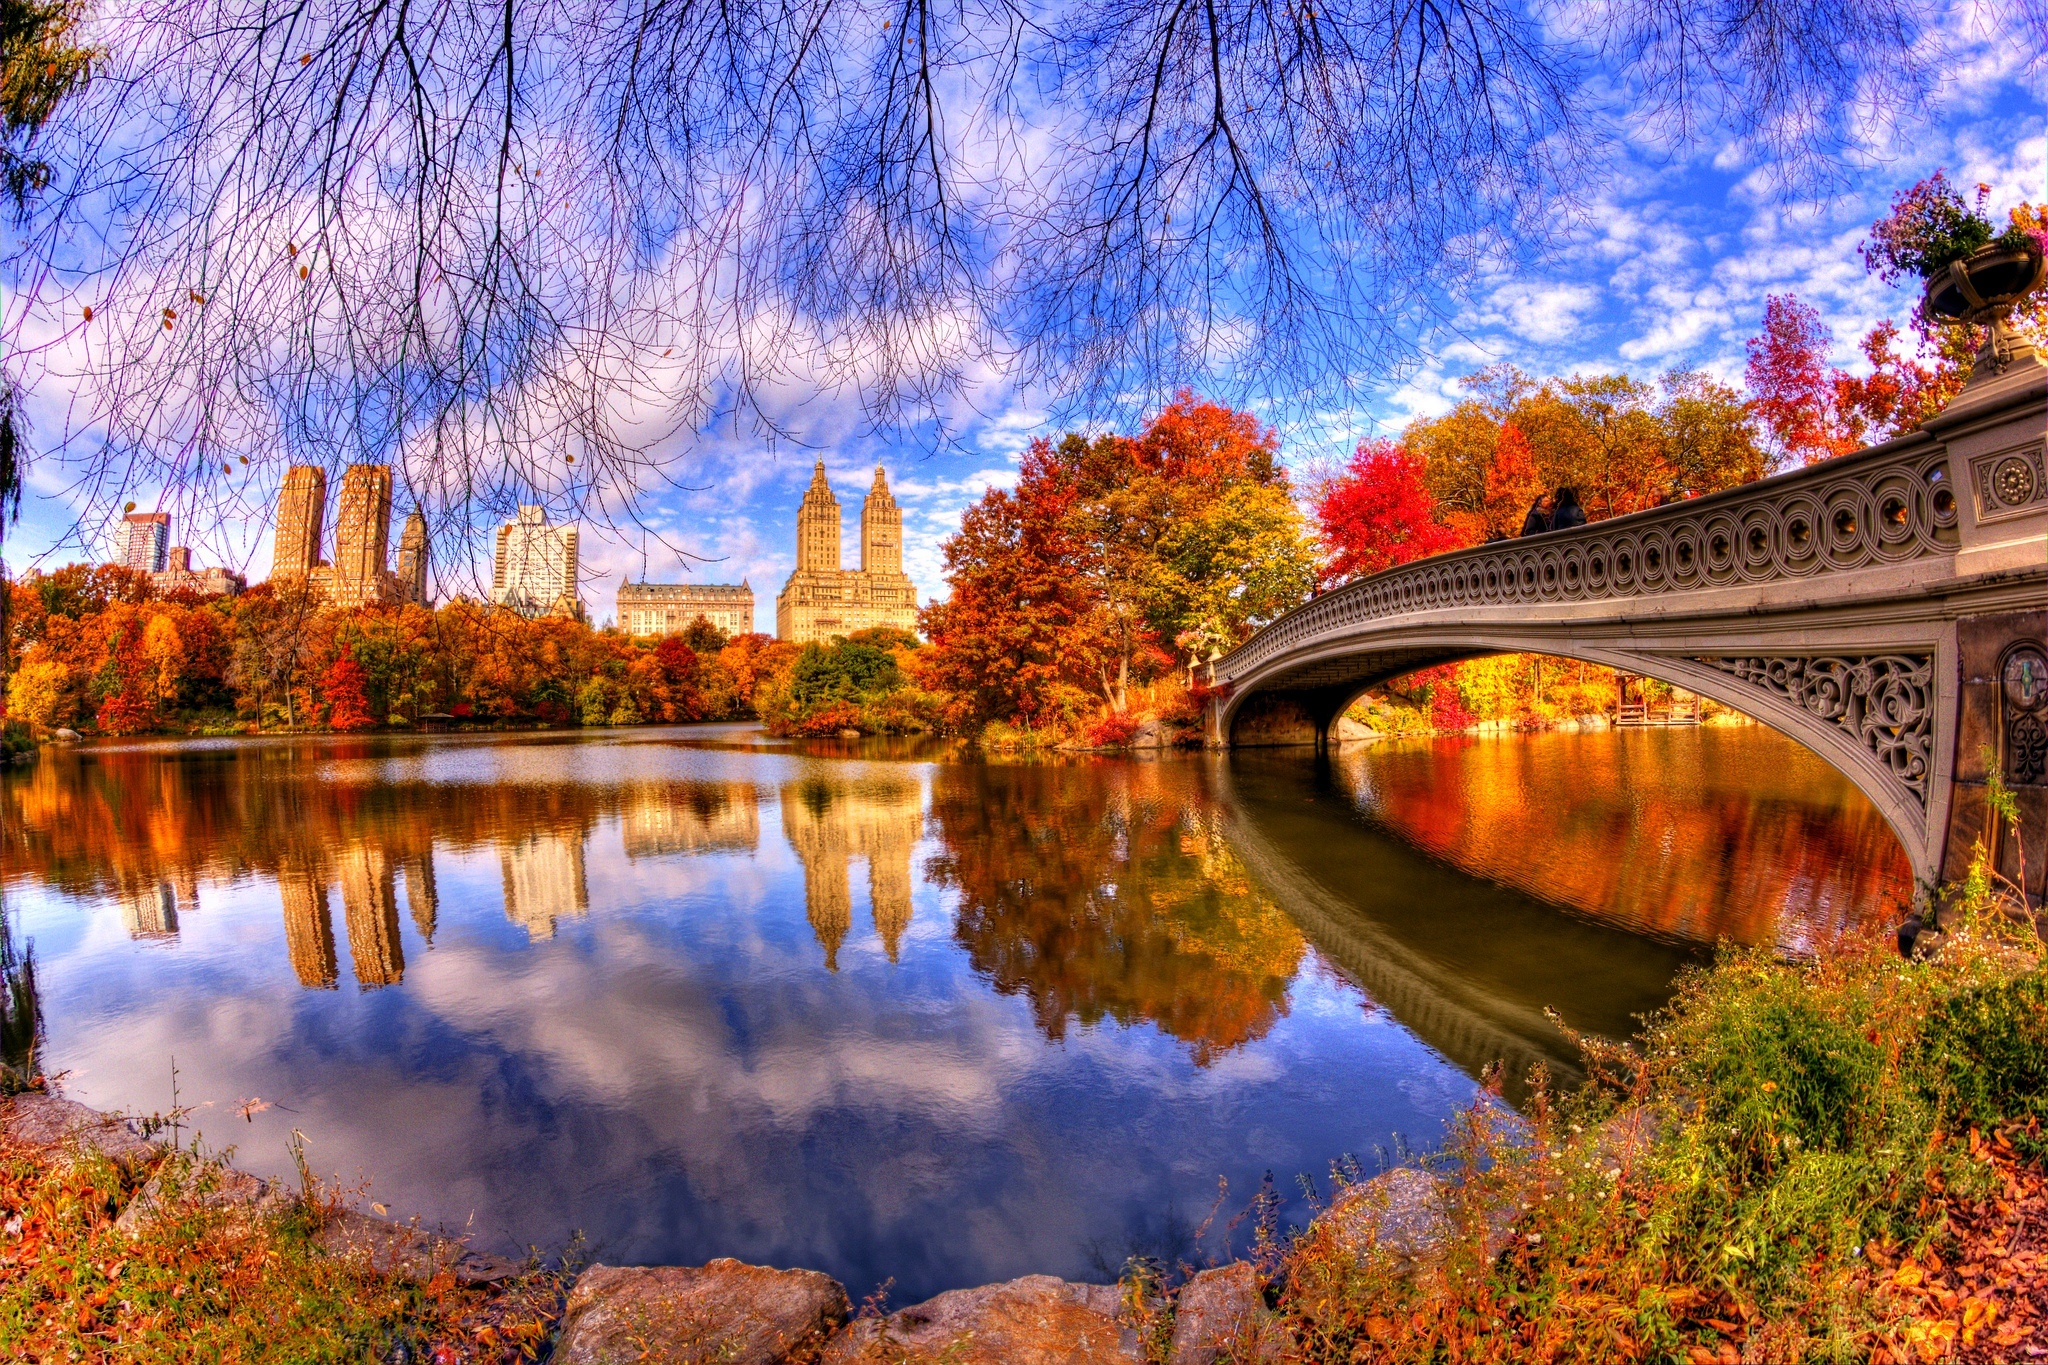 Central-Park-still-life-autumn-anuture-beauty-image-view-river.jpg